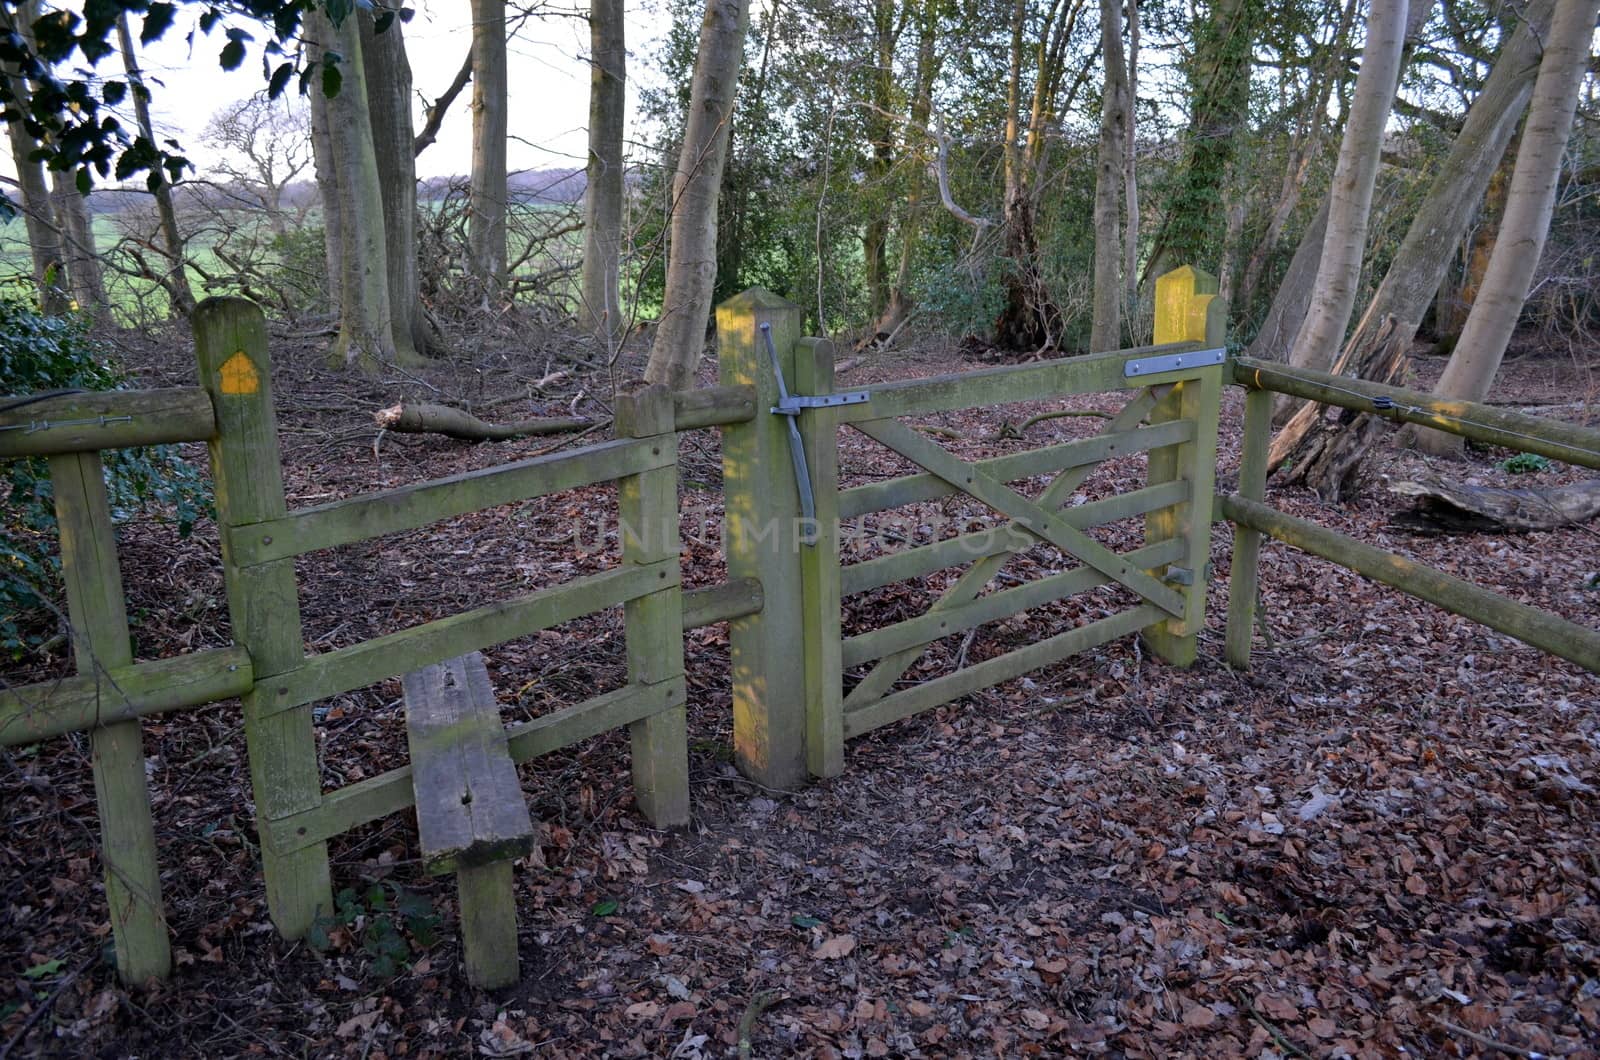 Wooden country gates,one for the public and the other for riders on horses.